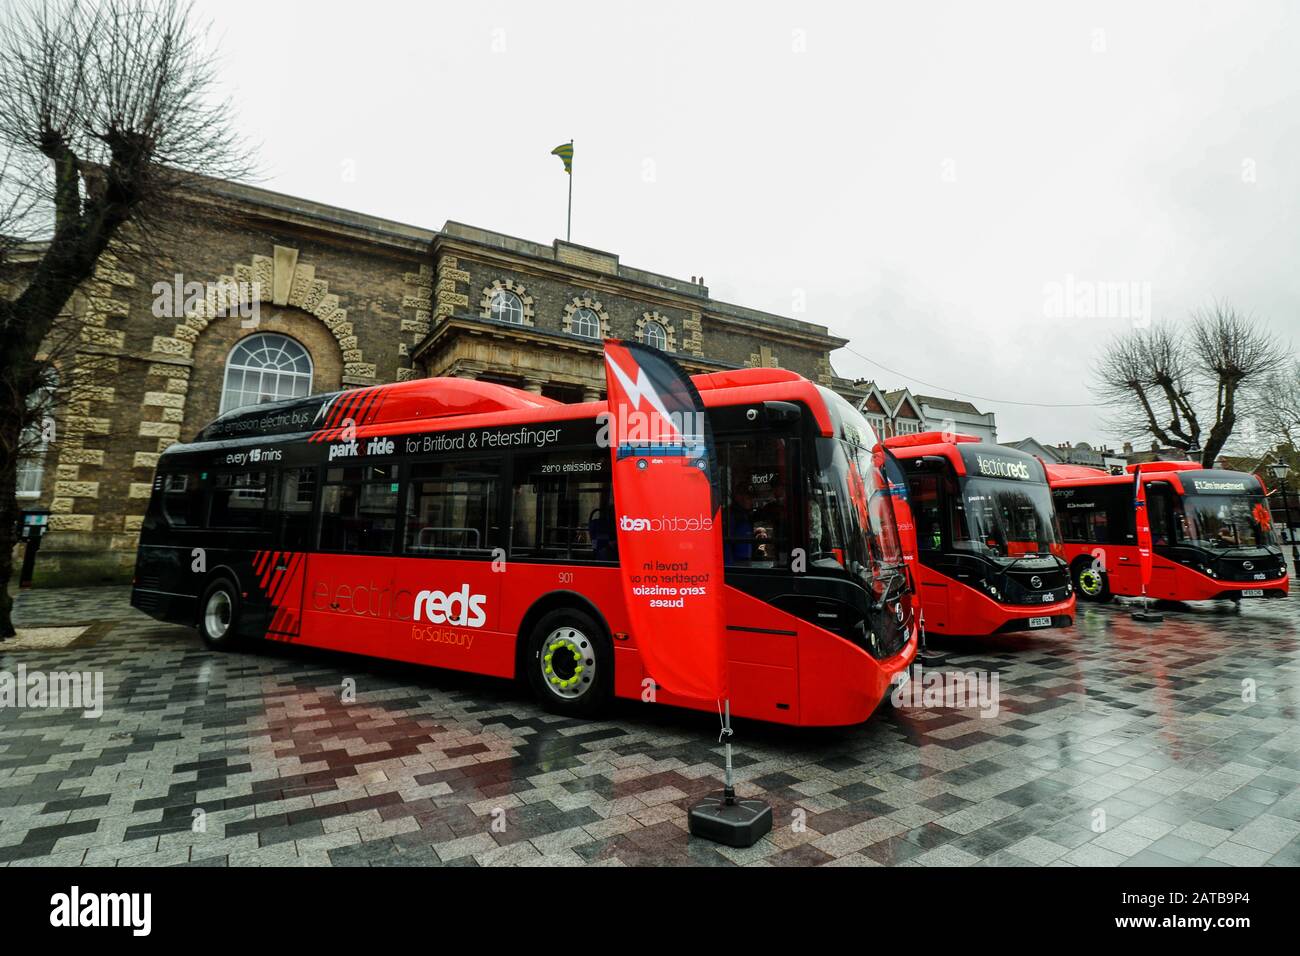 Salisbury Reds Electric Bus Launch at Salisbury Guildhall, 30th January 2020.  A total investment of £1.2 million paved the way for the latest additions to the city’s park and ride services, following a successful bid by the local bus operator and Wiltshire Council for £600,000 of Government funding.  The move means greener and cleaner journeys across the region.  Salisbury Reds is part of Go South Coast Stock Photo